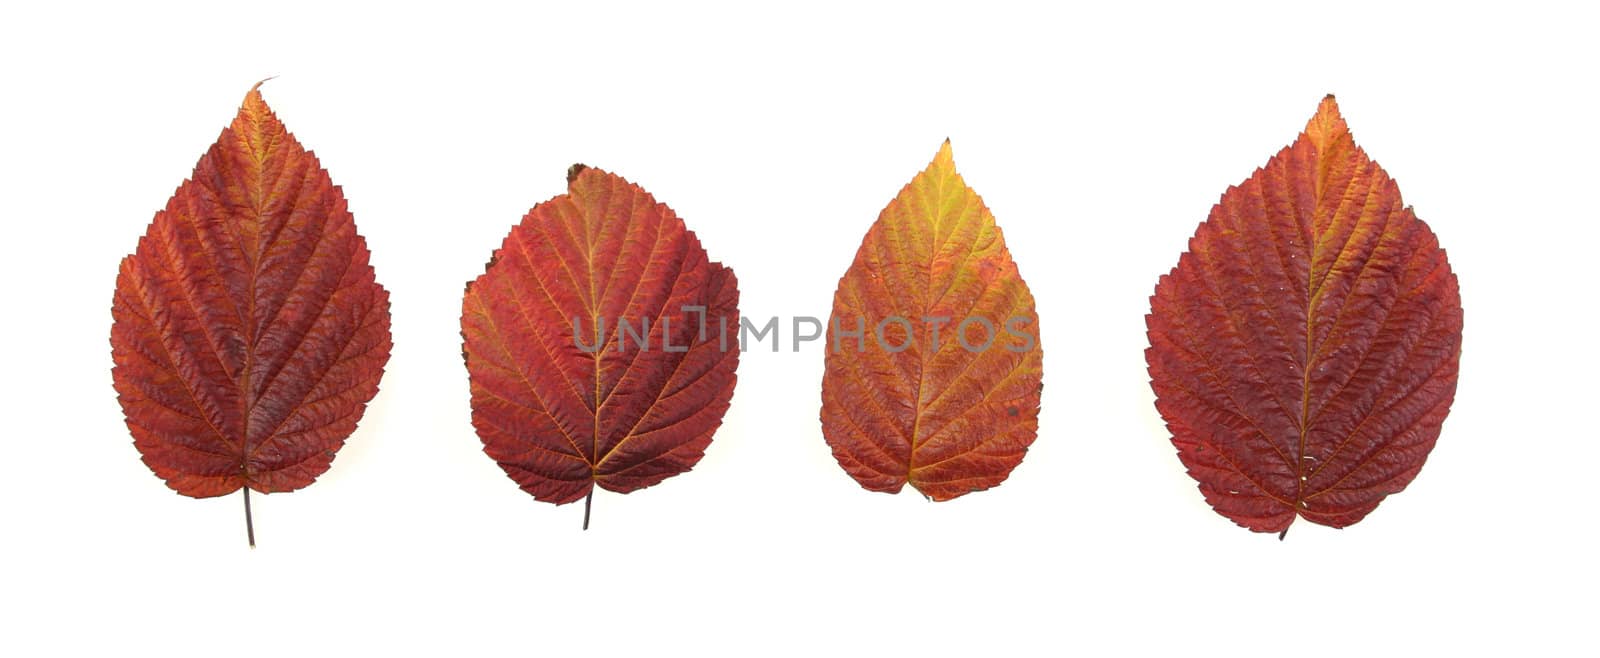 Autumn - colorful October tree leaves. Isolated red raspberry bush leaves.